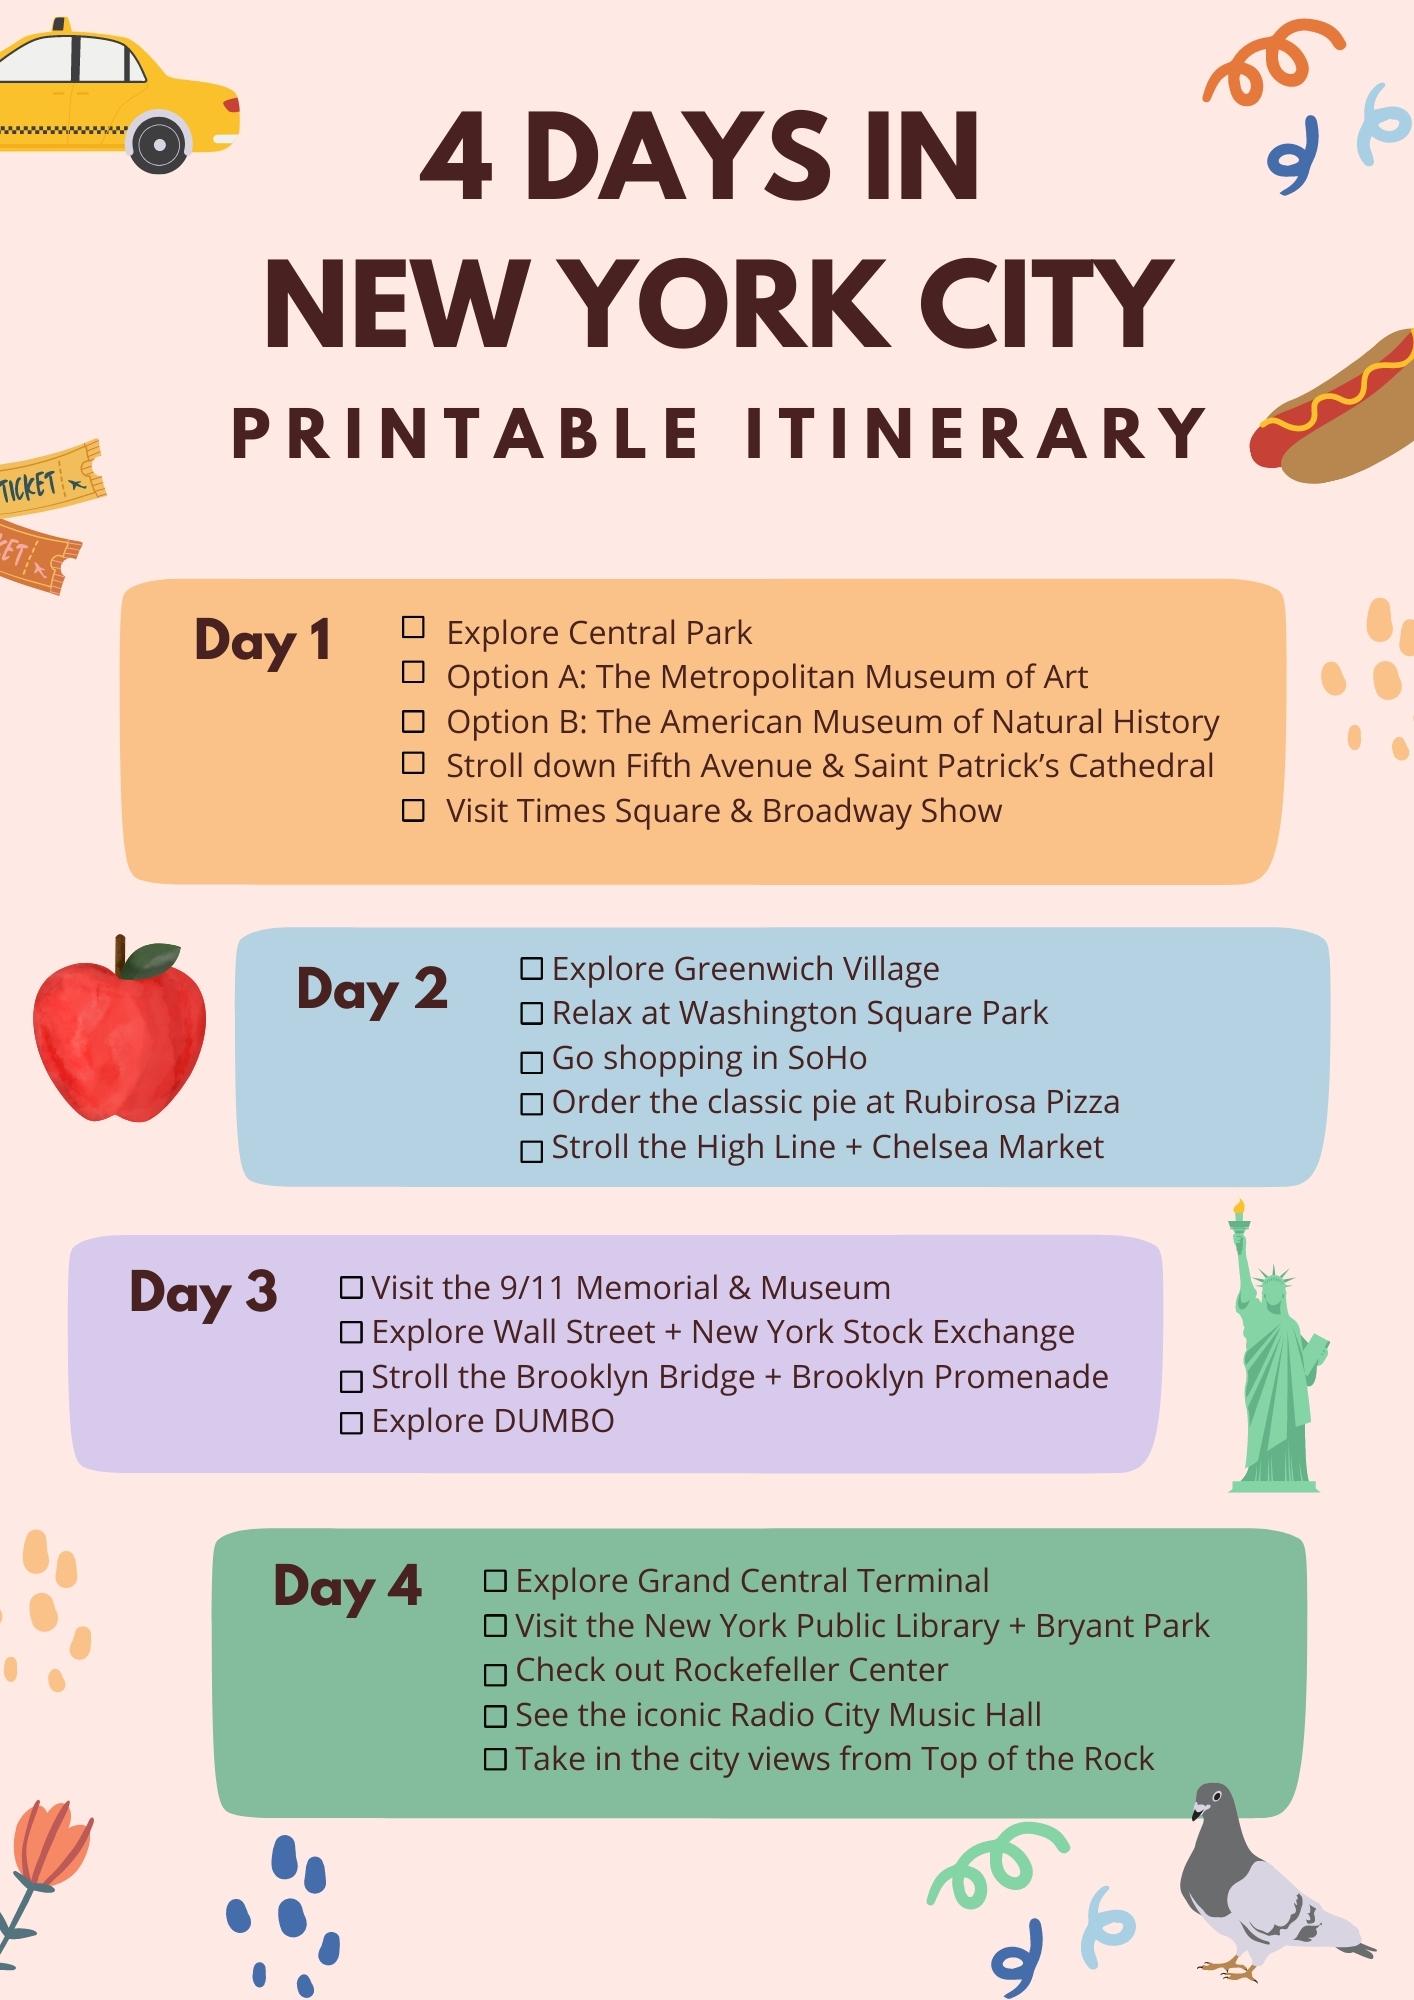 4 Days in New York City Printable Itinerary 